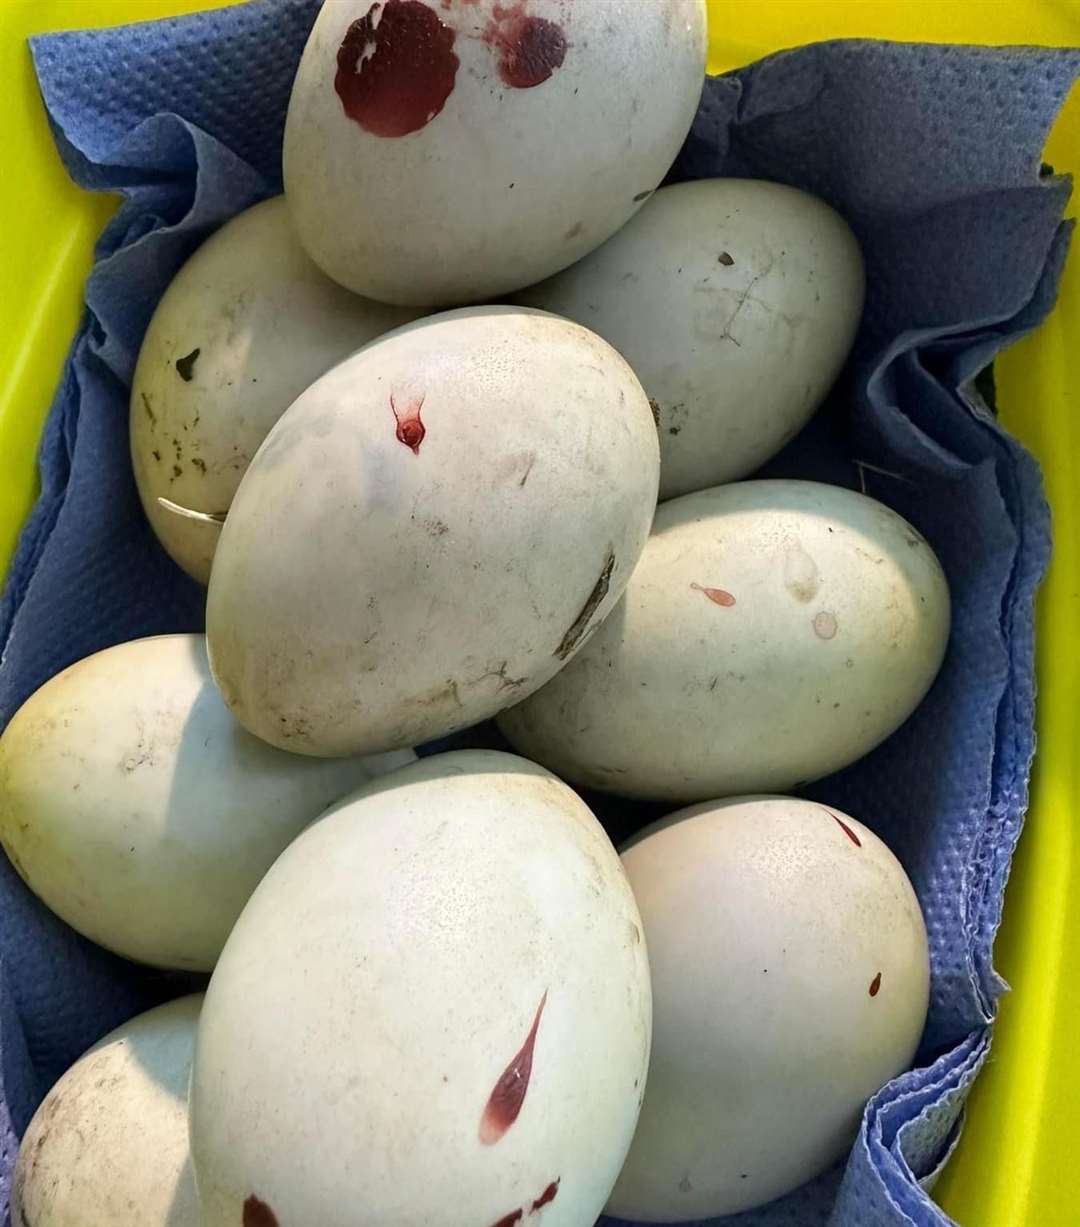 Nine eggs were found next to the dead duck. Picture: Columbines Wildlife Care